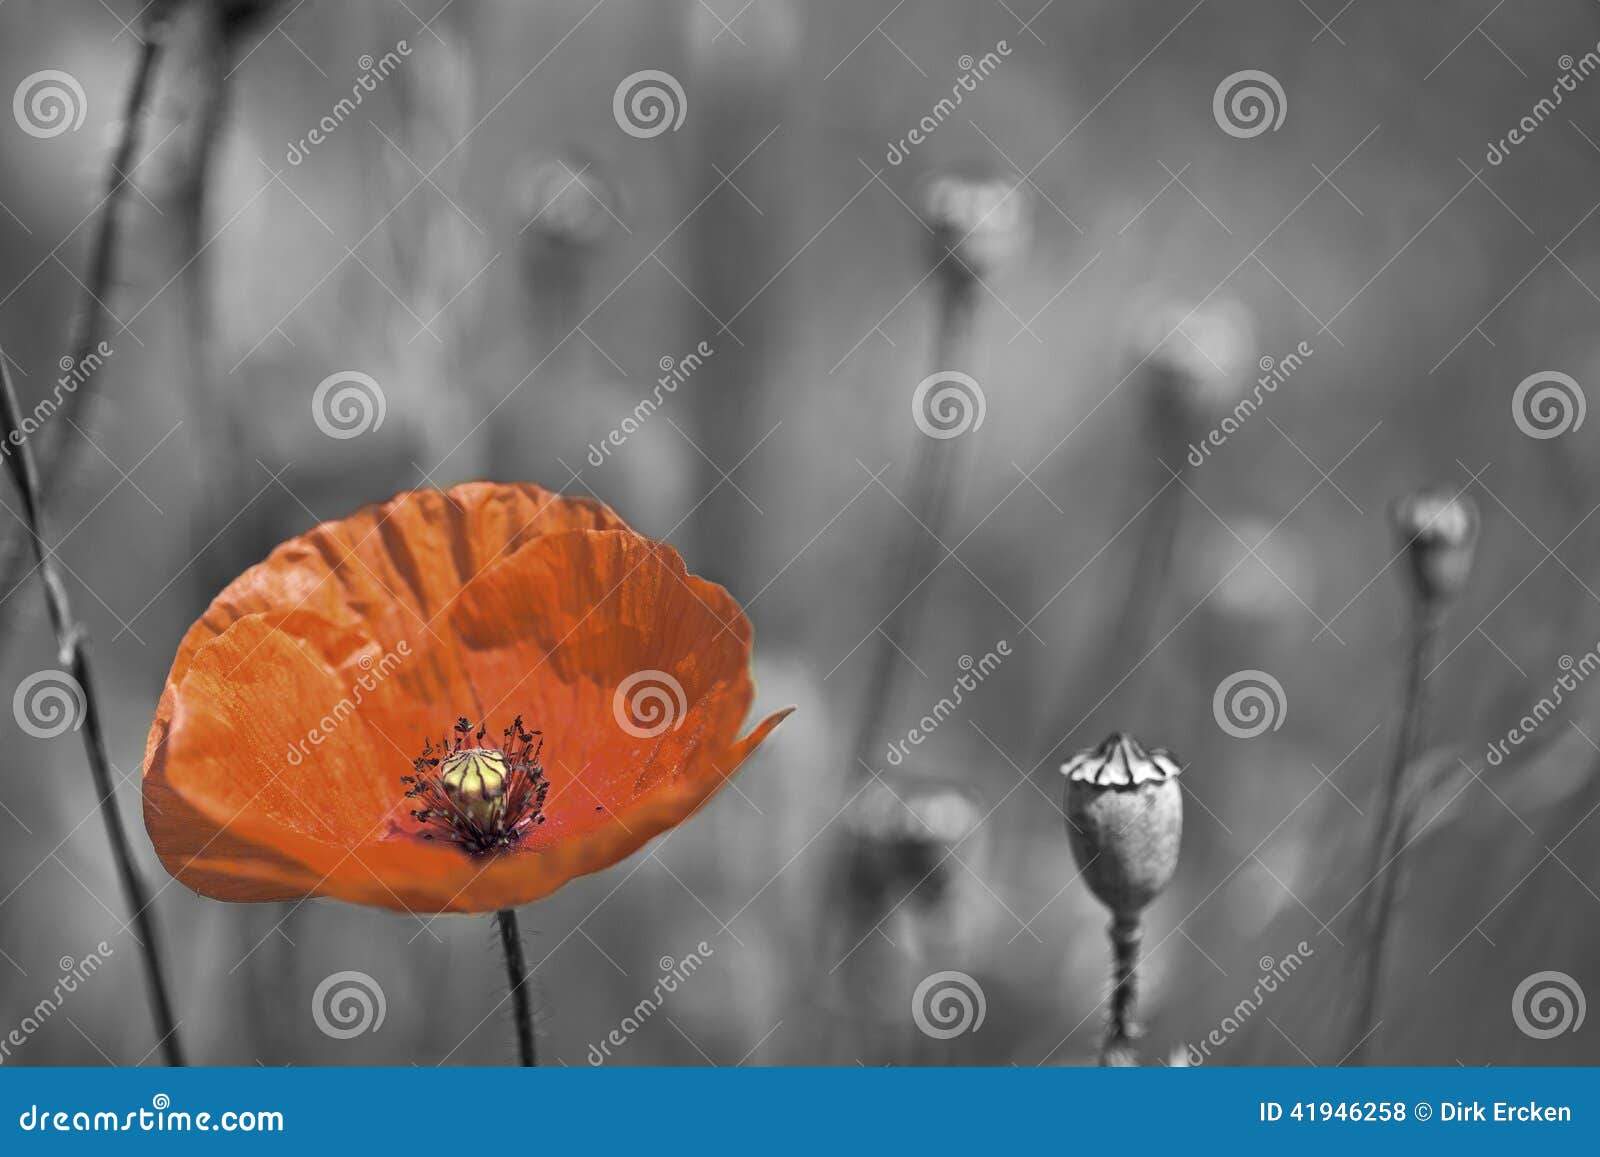 Remembrance Day 2022 Images and HD Wallpapers for Free Download Online:  Share Quotes, Greetings and Messages on Poppy Day With Your Loved Ones